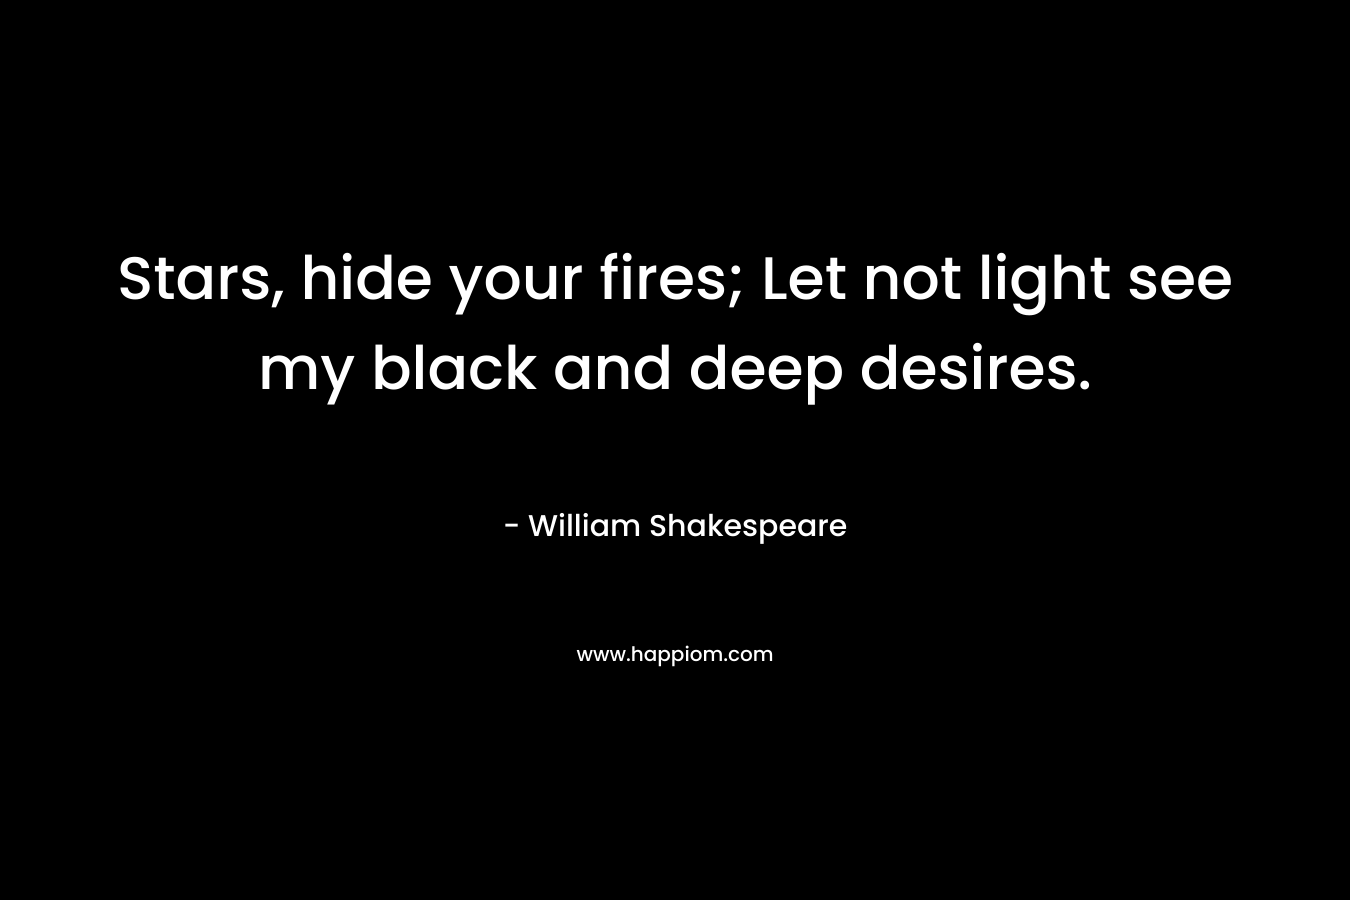 Stars, hide your fires; Let not light see my black and deep desires. – William Shakespeare